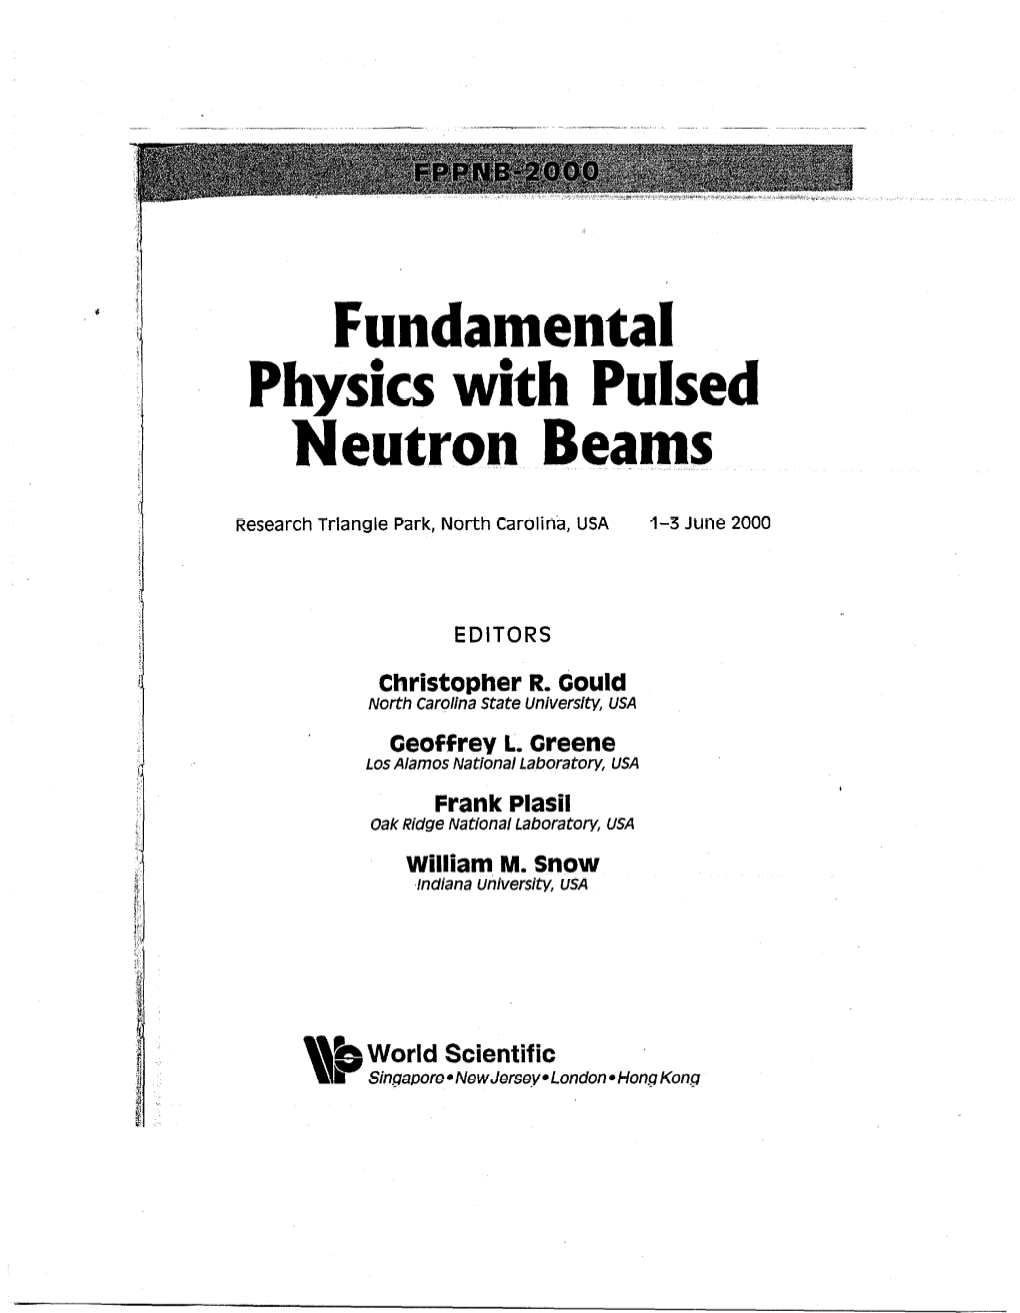 FUNDAMENTAL PHYSICS with PULSED NEUTRON BEAMS (FPPNB-2000) Copyright Q 2001 by World Scientific Publishing Co